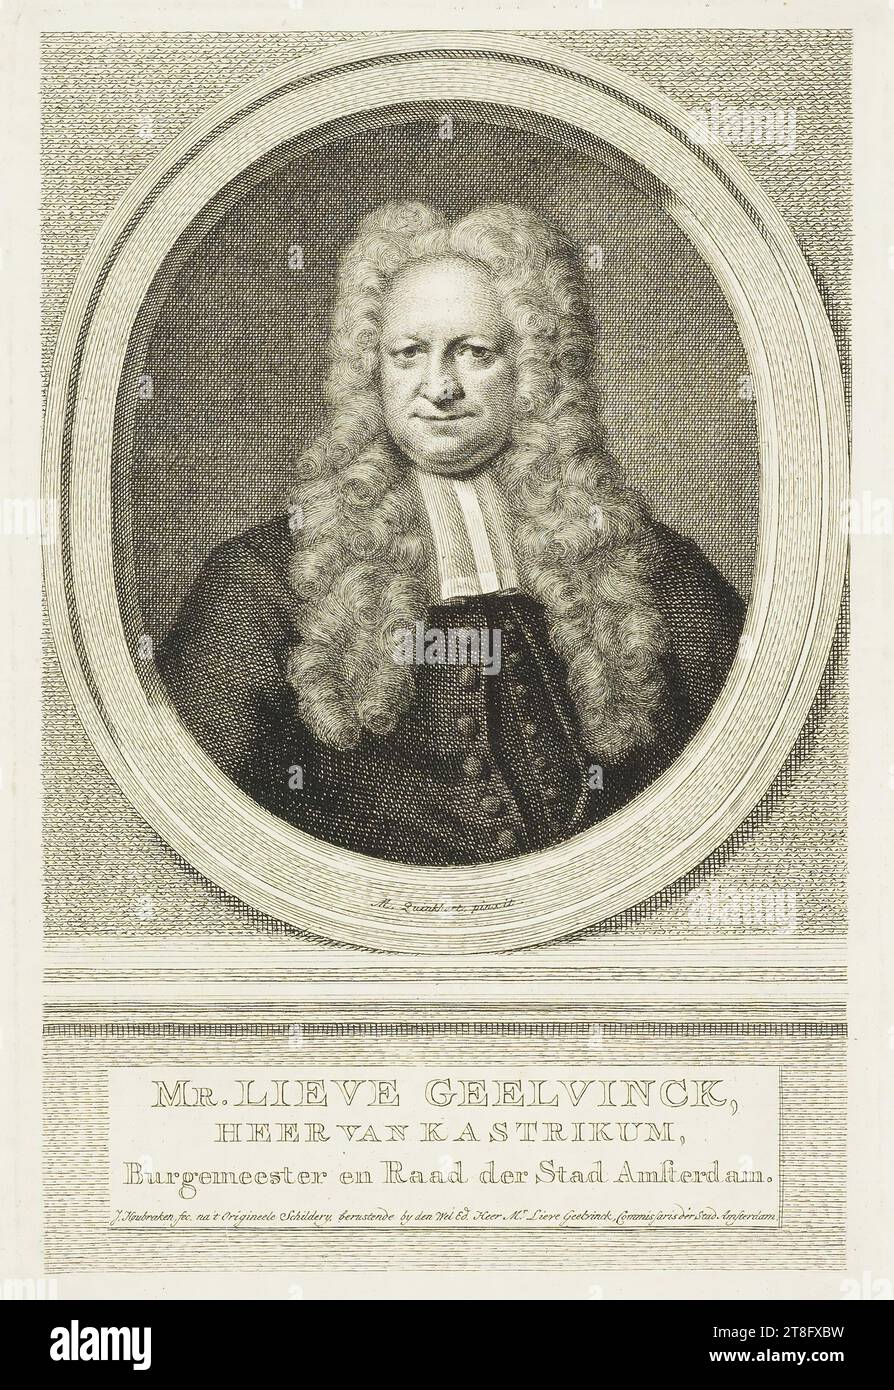 M. Quinkhart, pinxit. MR. DEAR GEELVINCK, LORD OF KASTRIKUM, Mayor and Council of the City of Amsterdam. J. Houbraken fec. after the Original Painting, held by den Wel Ed. mr. Dear Geelvinck, Commissioner of the City of Amsterdam Stock Photo